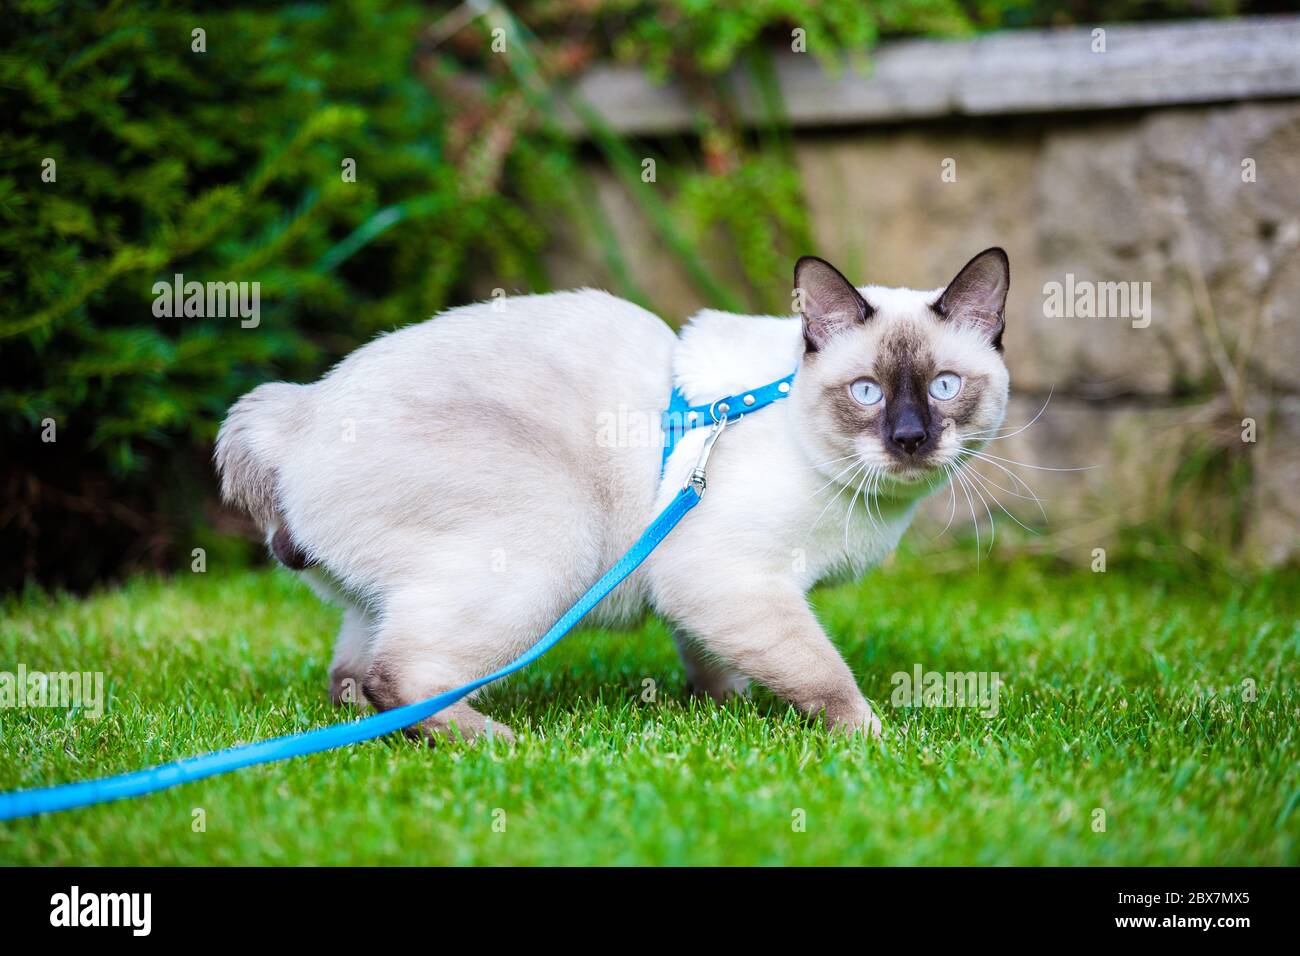 Cute Funny Young Cat Of The Mekong Bobtail Breed Walks Merrily On A Green Juicy Meadow A Cat From The Siamese Family With No Tail And Blue Eyes Sits Stock Photo